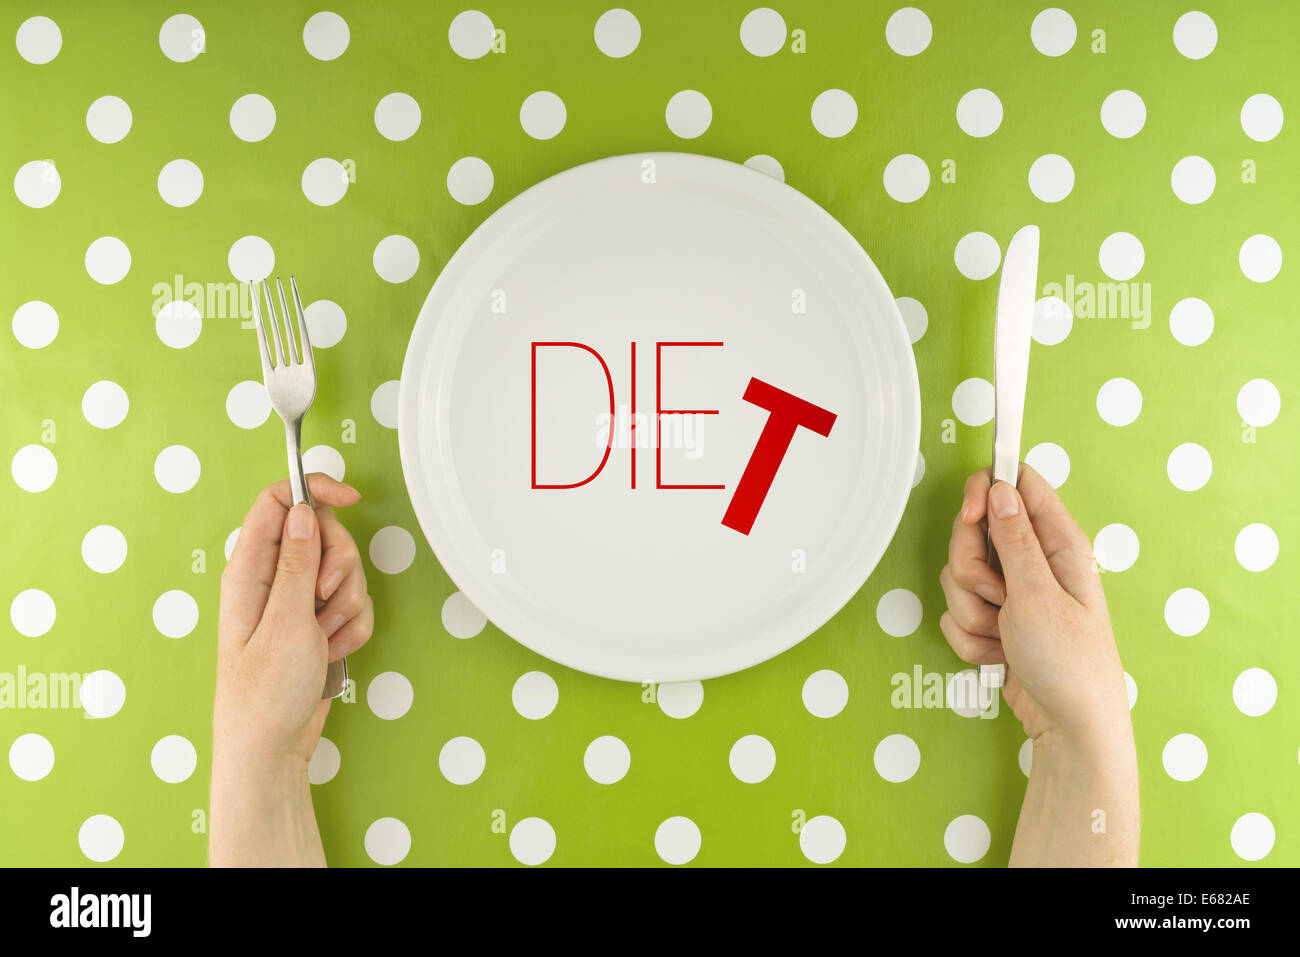 Female hands at dinner table holding fork and a knife above plate as dieting concept. Word Diet becoming Die reffering to health Stock Photo